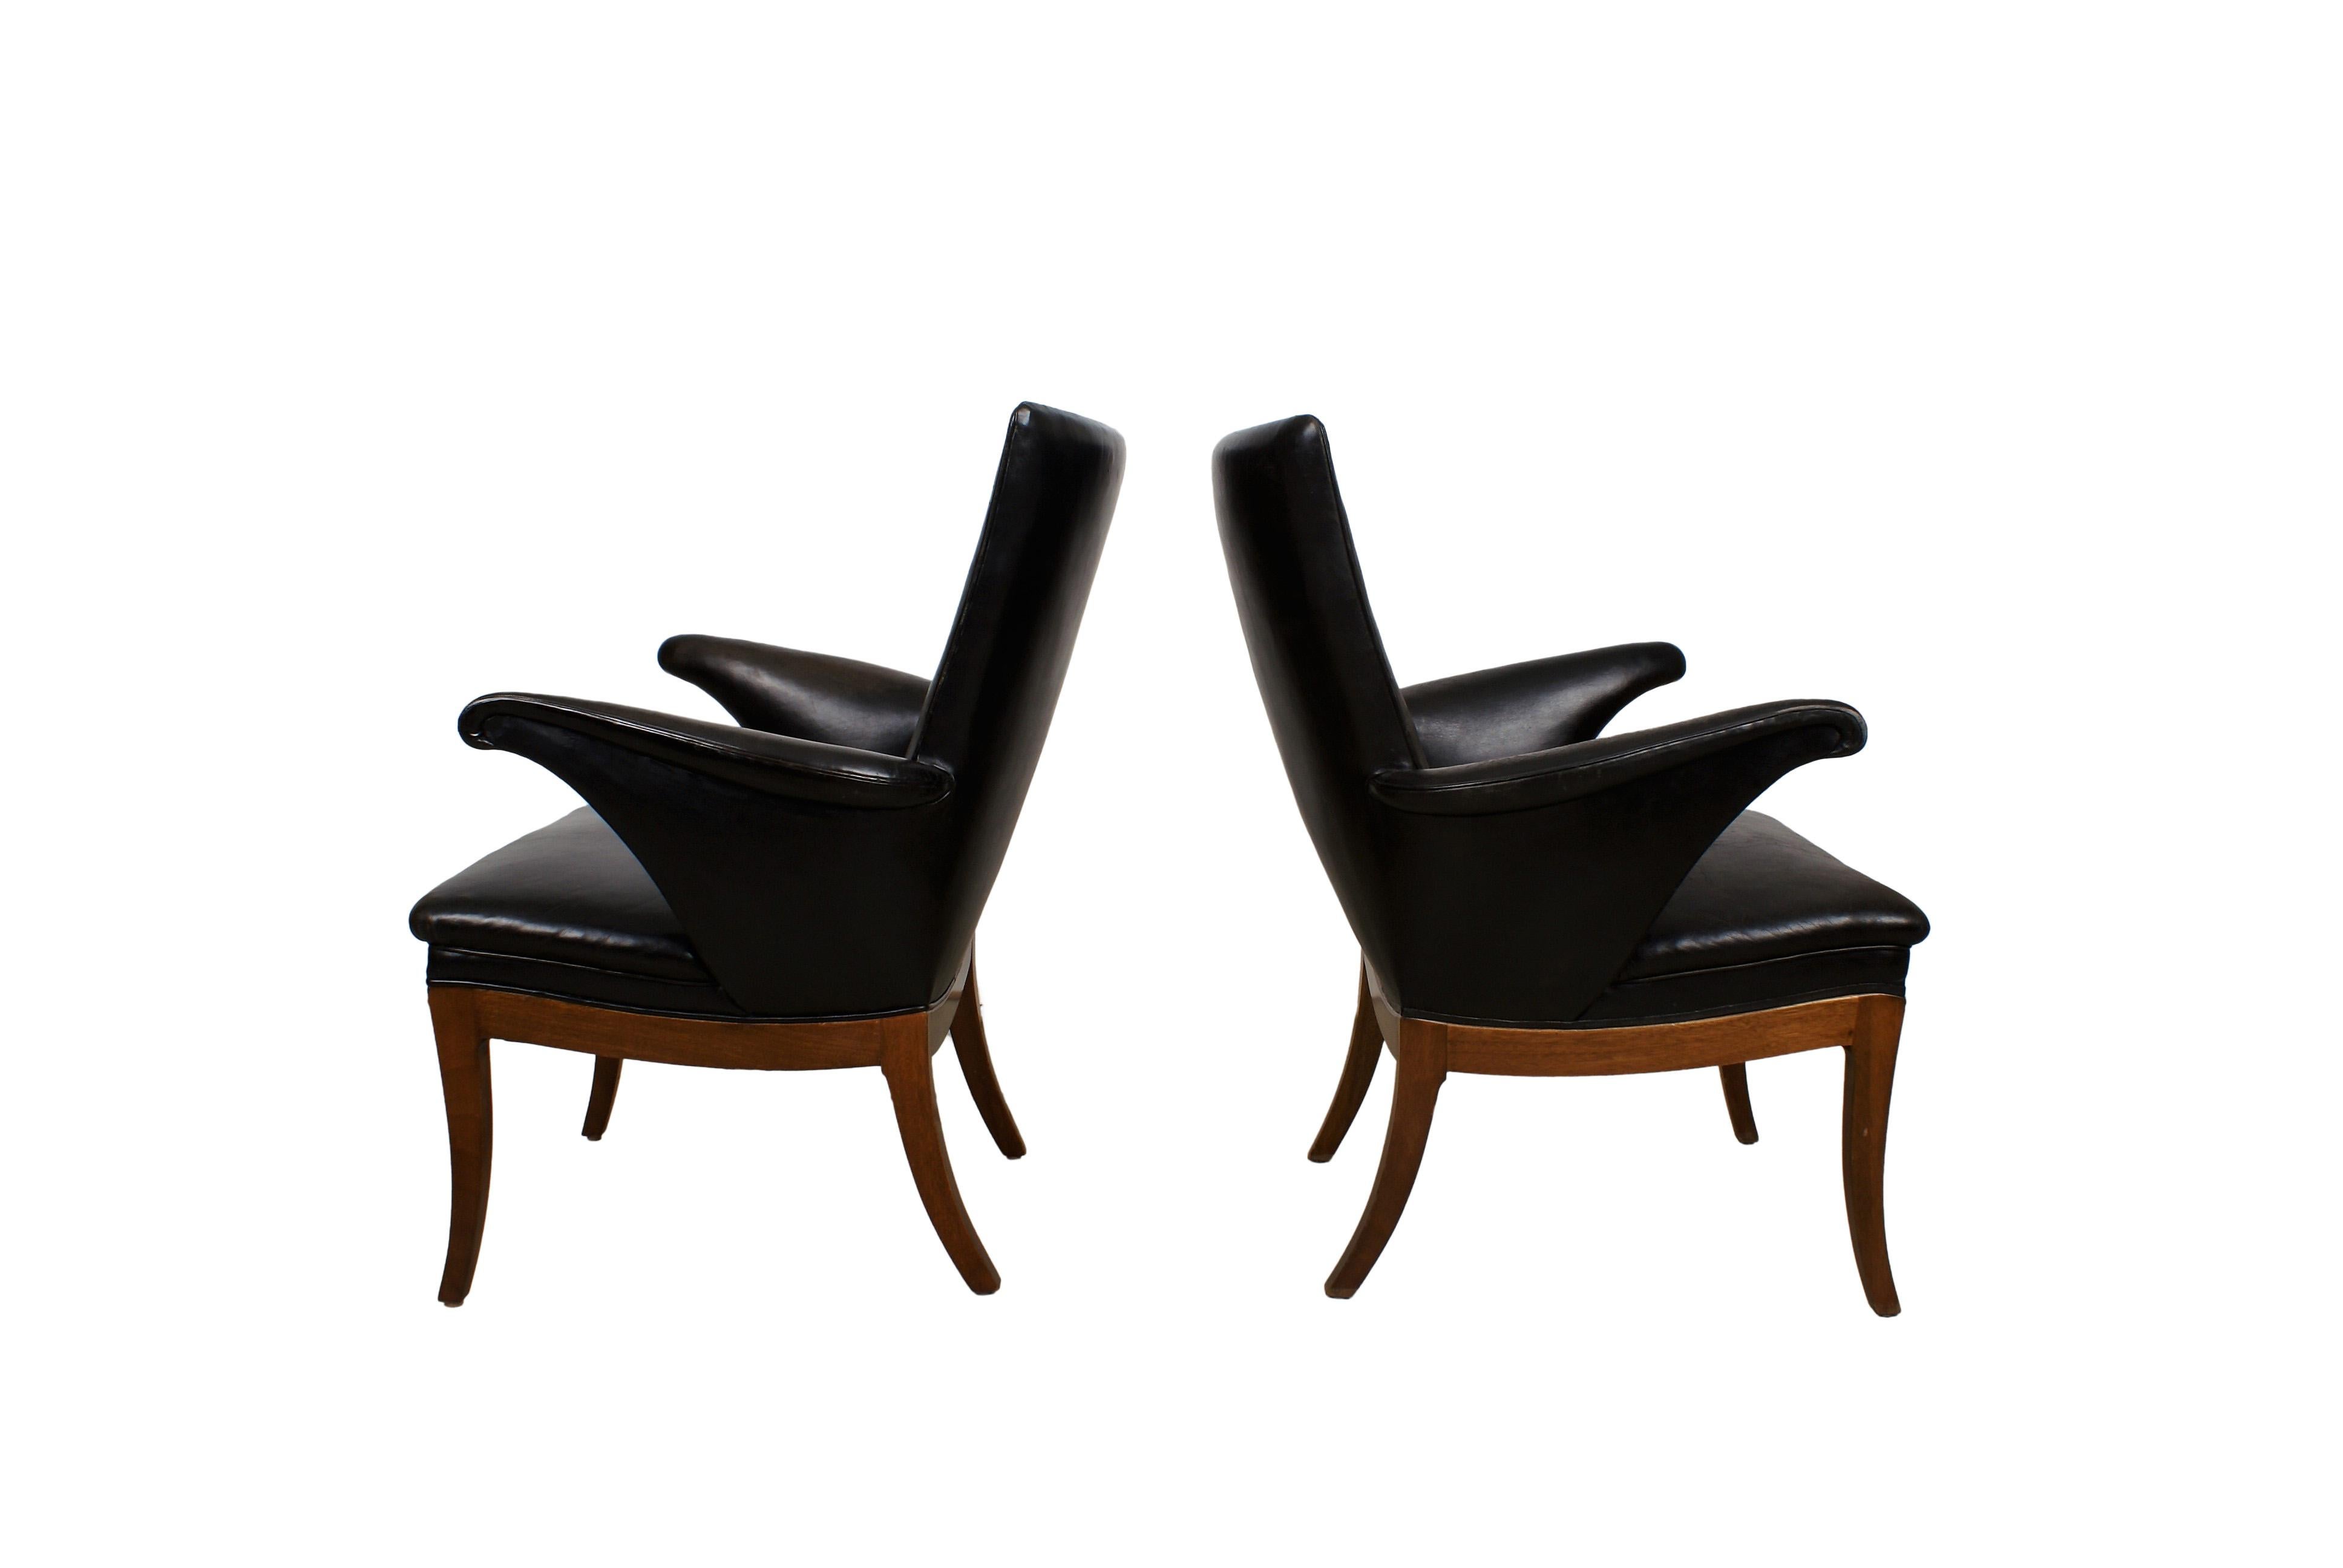 Frits Henningsen, pair of Cuban mahogany armchairs with curved armrests and legs. Sides, seat and back upholstered with patinated original black leather, fitted with brass nails. Back with leather covered buttons. Designed 1932. Made by cabinetmaker